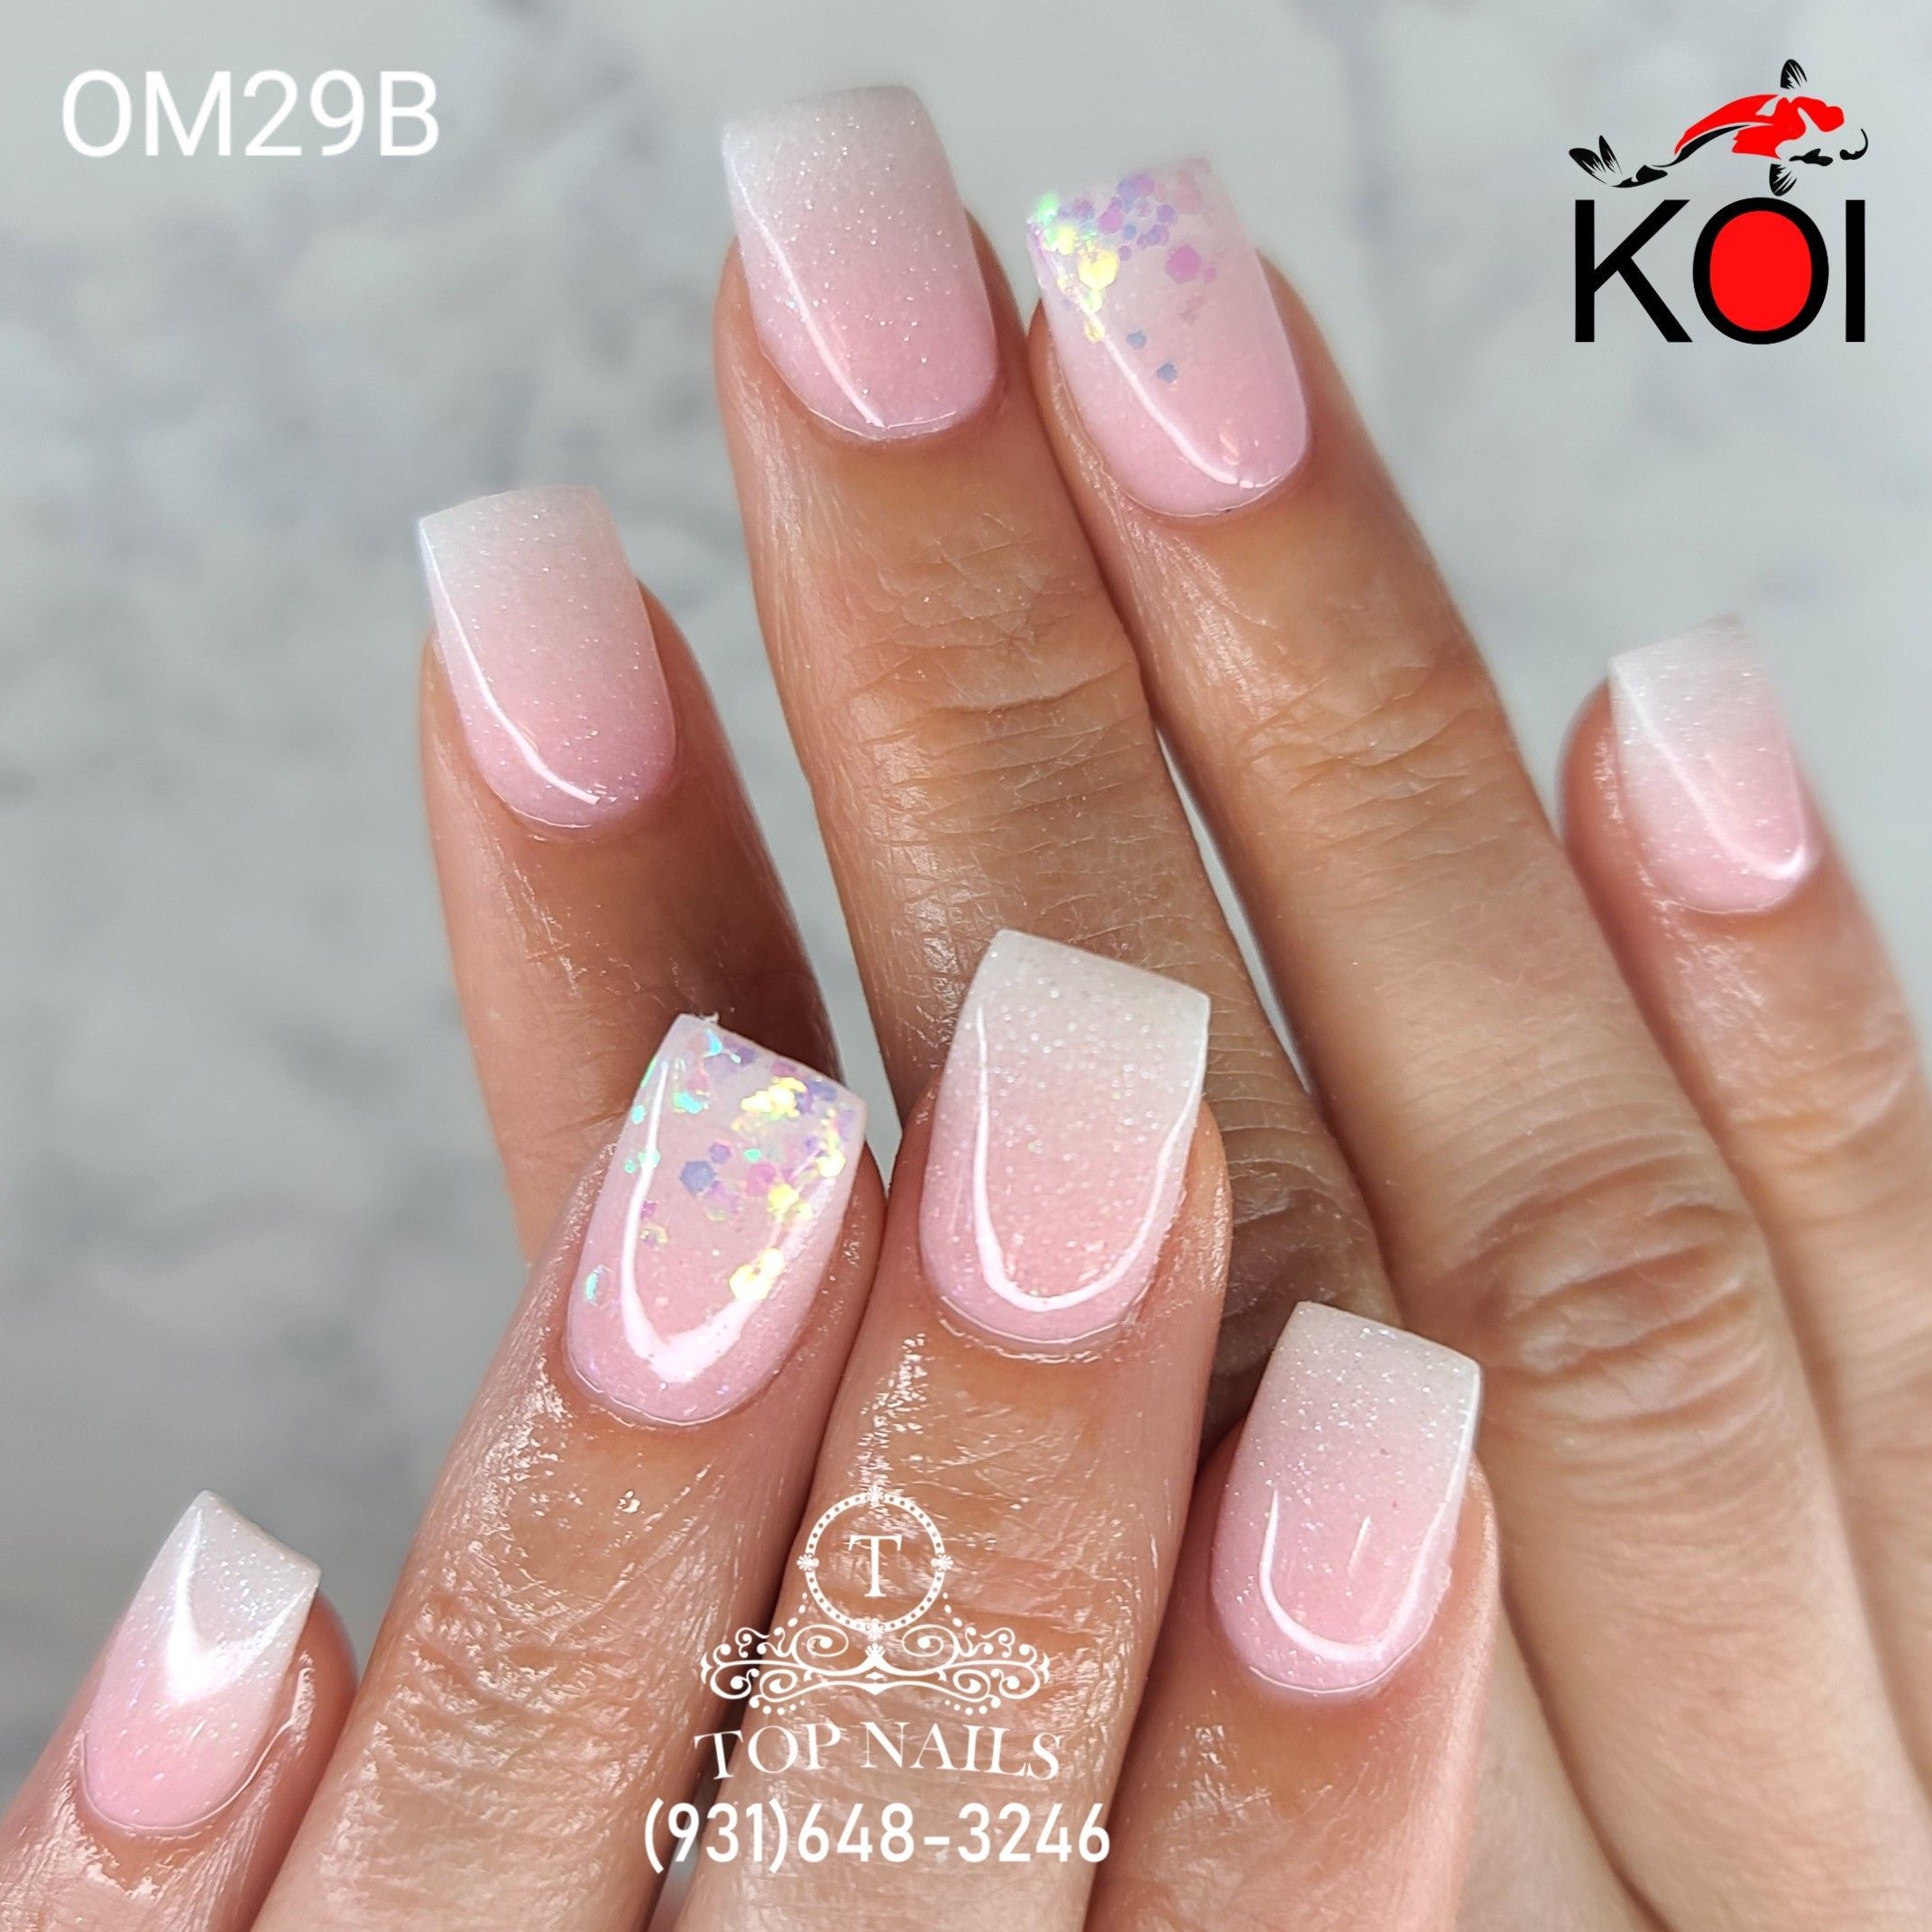 SOAK OFF + Dip French or Ombre on Natural Nails portfolio